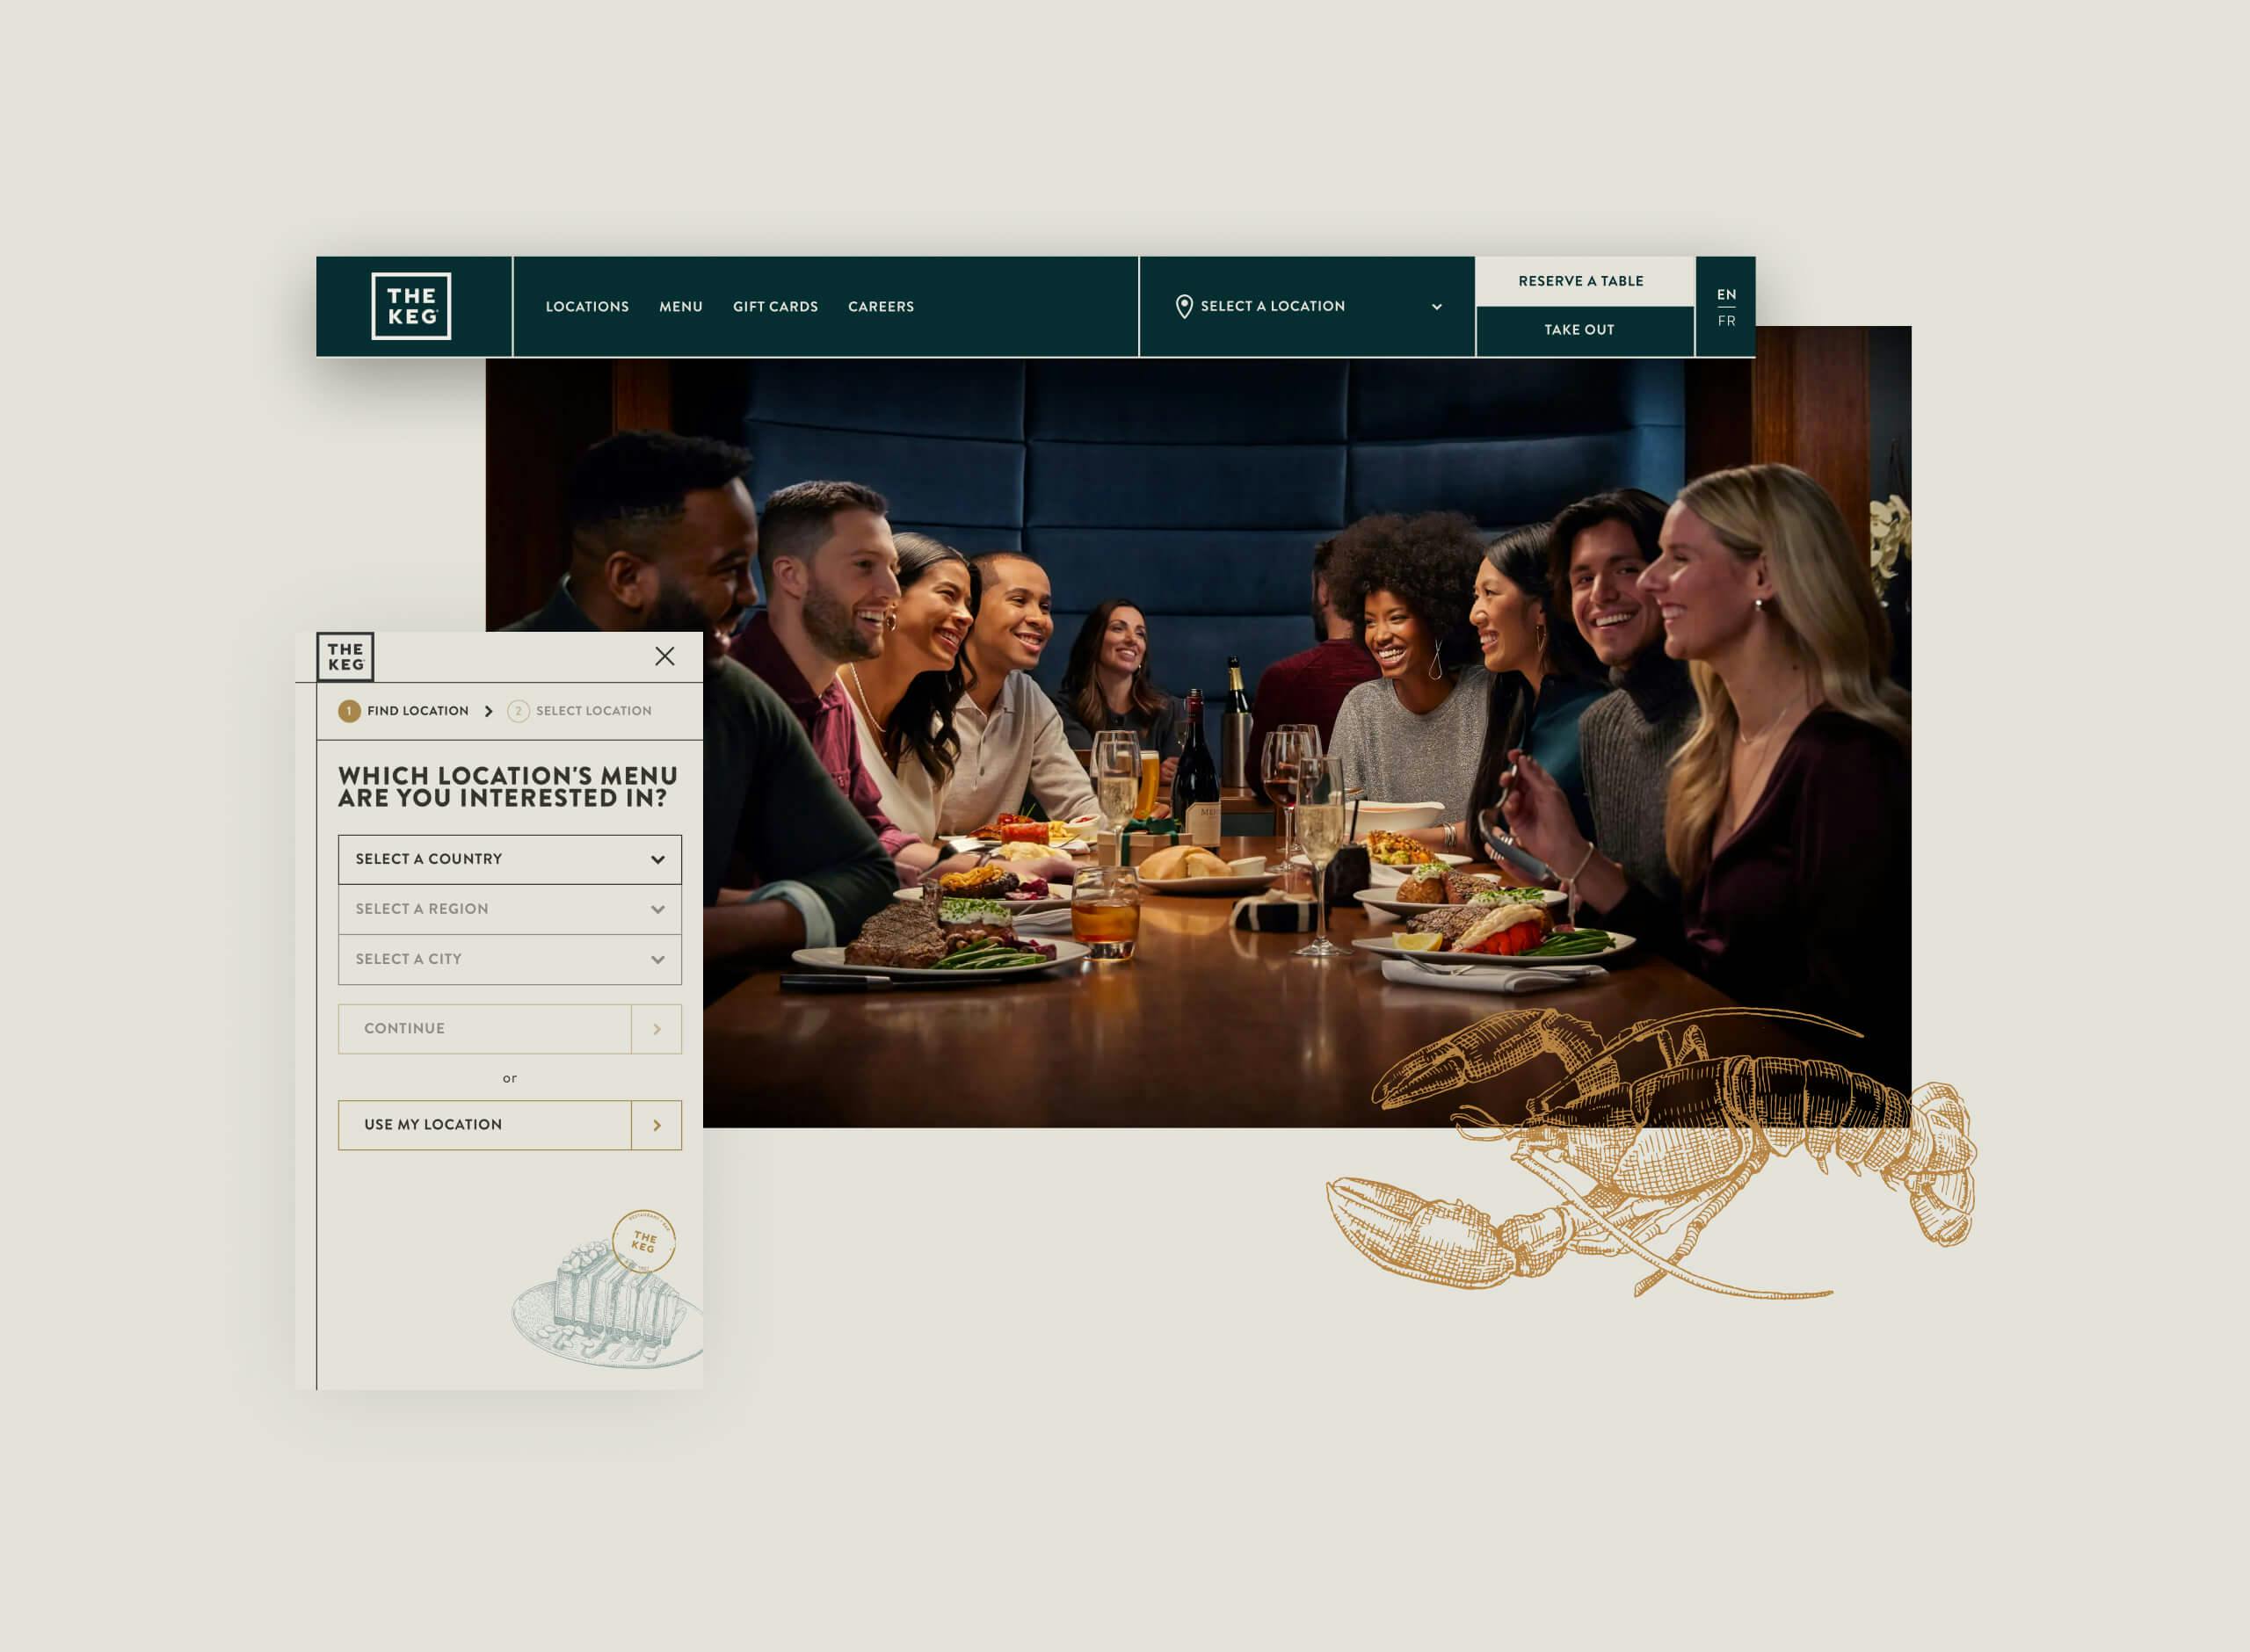 Thinkingbox designed a functional site with great user interface to express the new brand look as well as integrate the Keg's revamped branding.